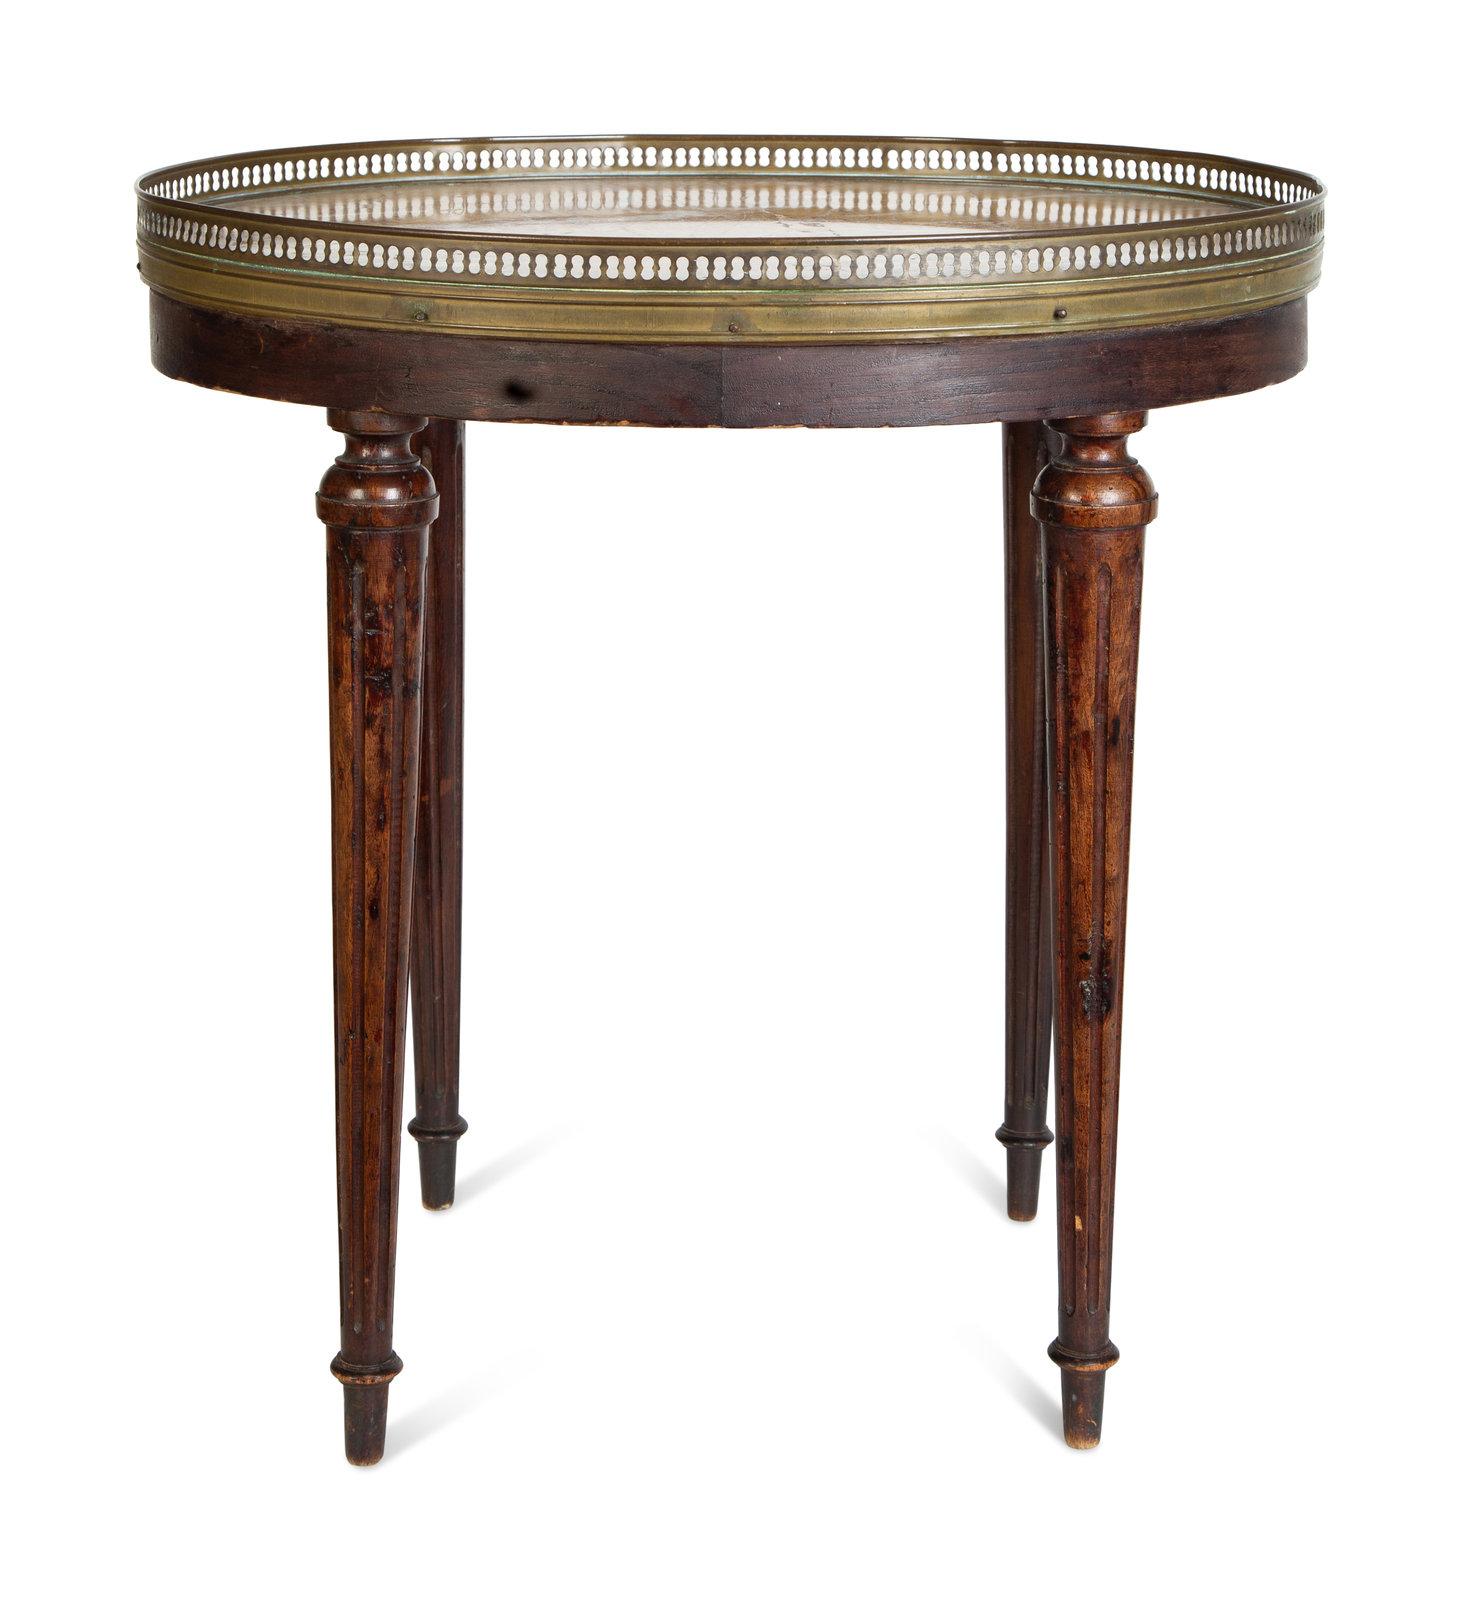 Round marble top side table with a brass gallery and reeded legs, late 19th century.
 